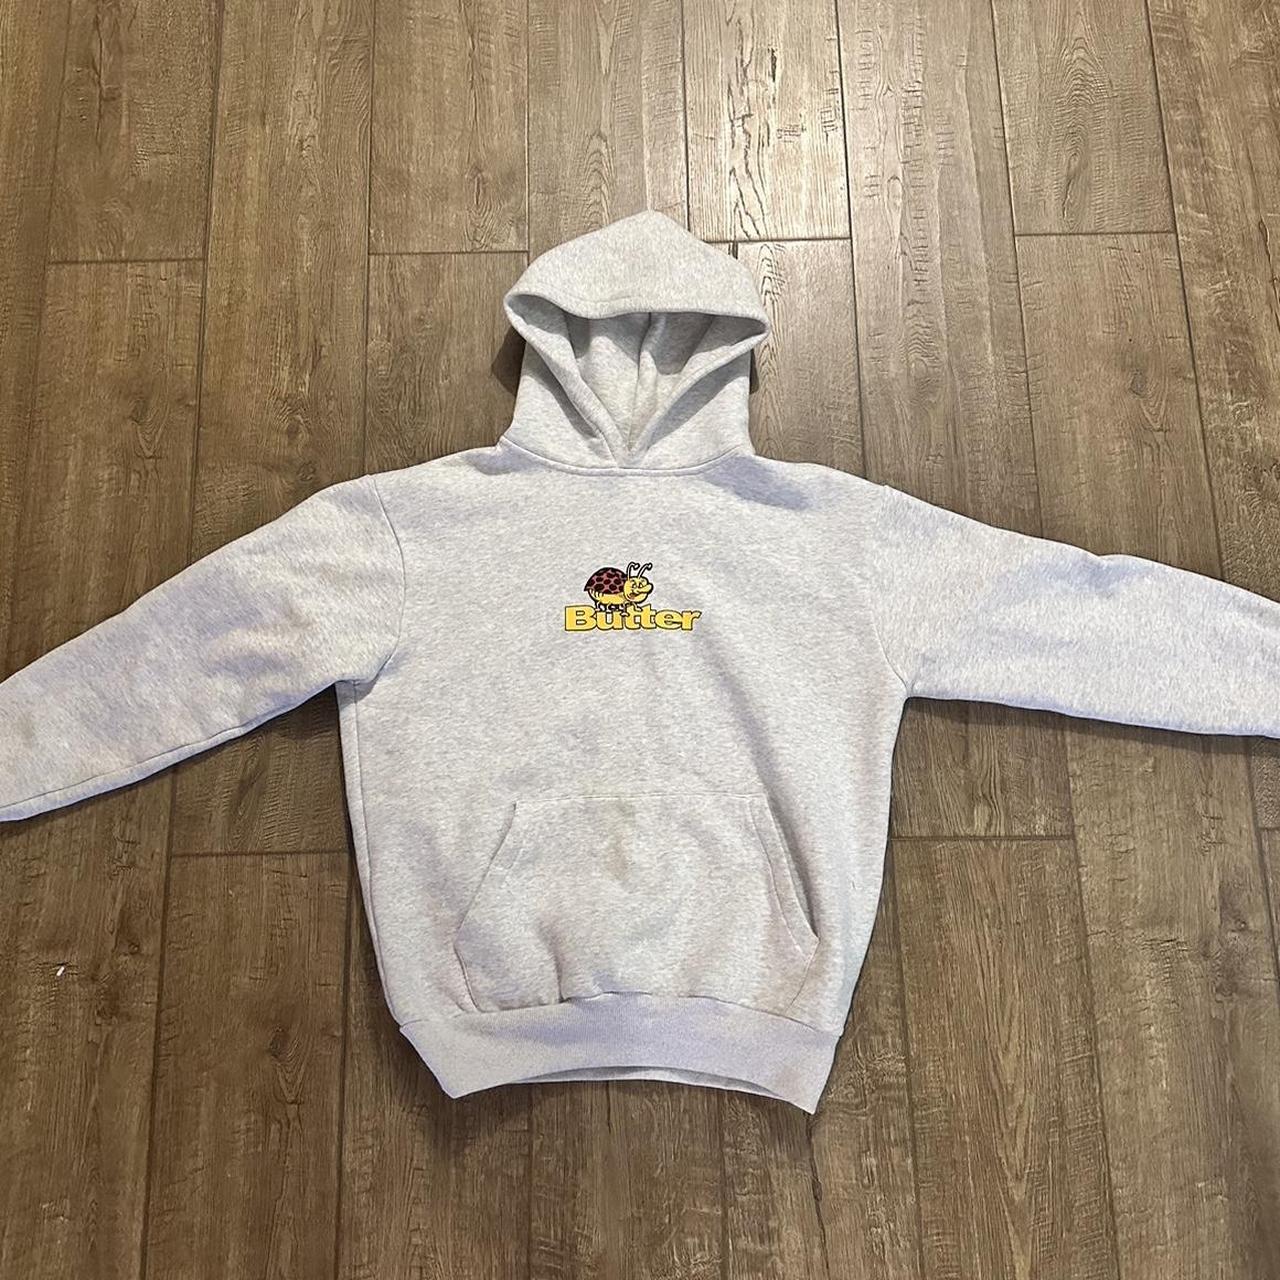 Butter hoodie like new, only worn once (M) - Depop